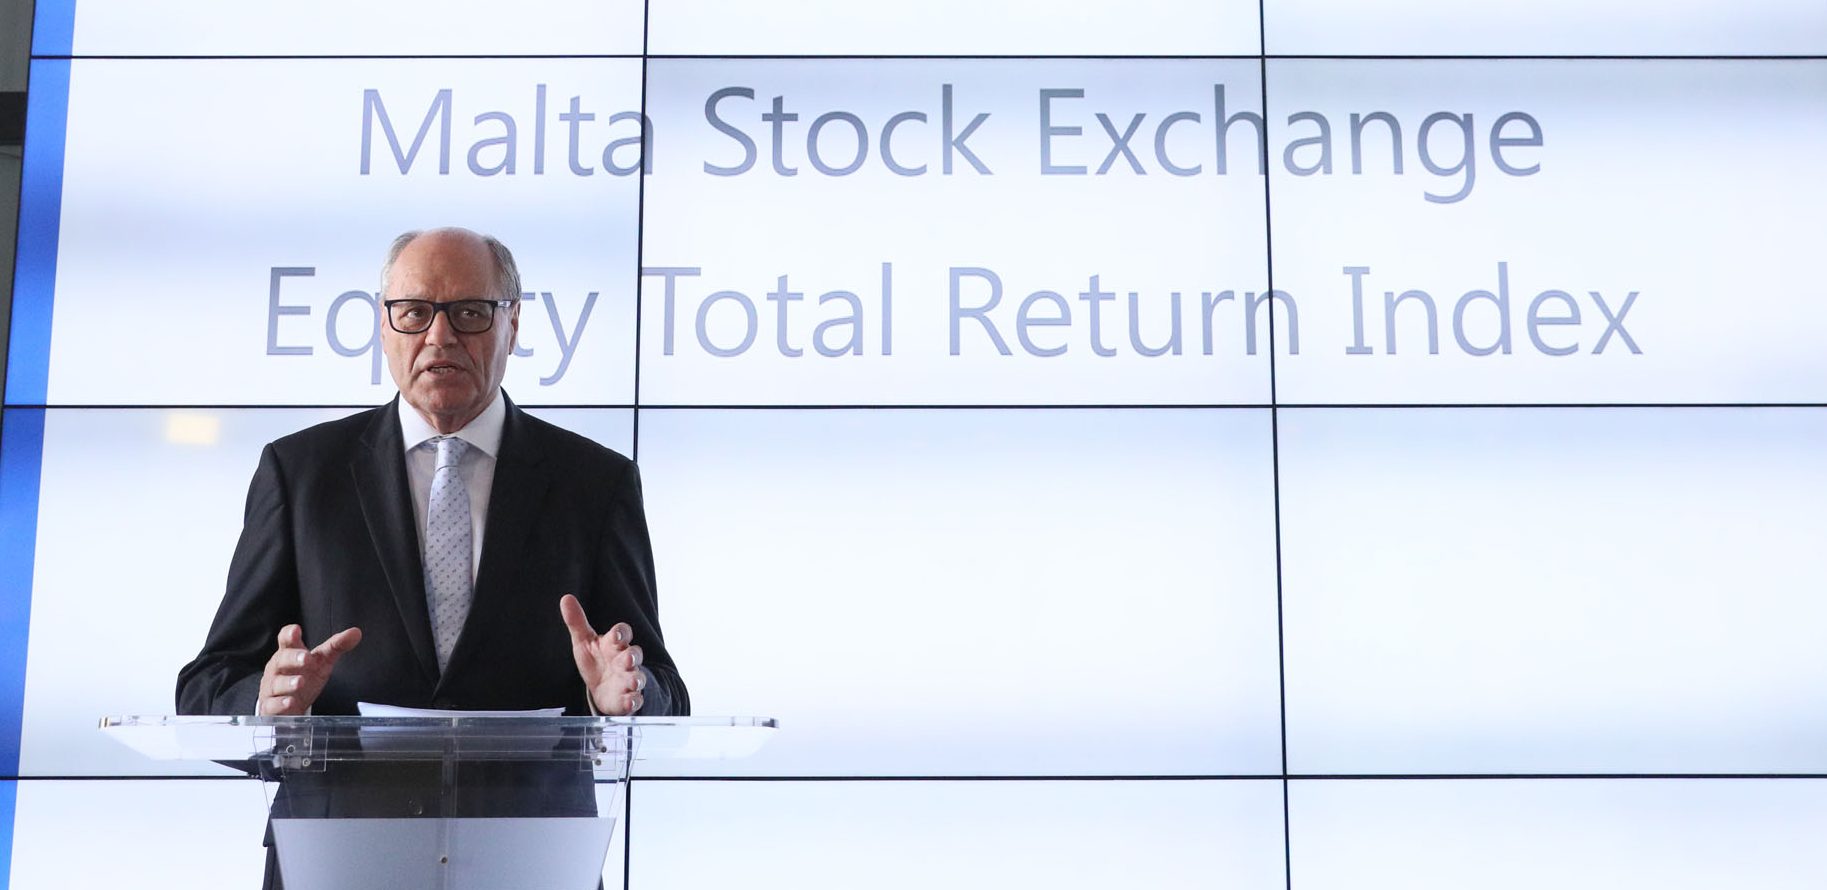 The Malta Stock Exchange introduces a new index